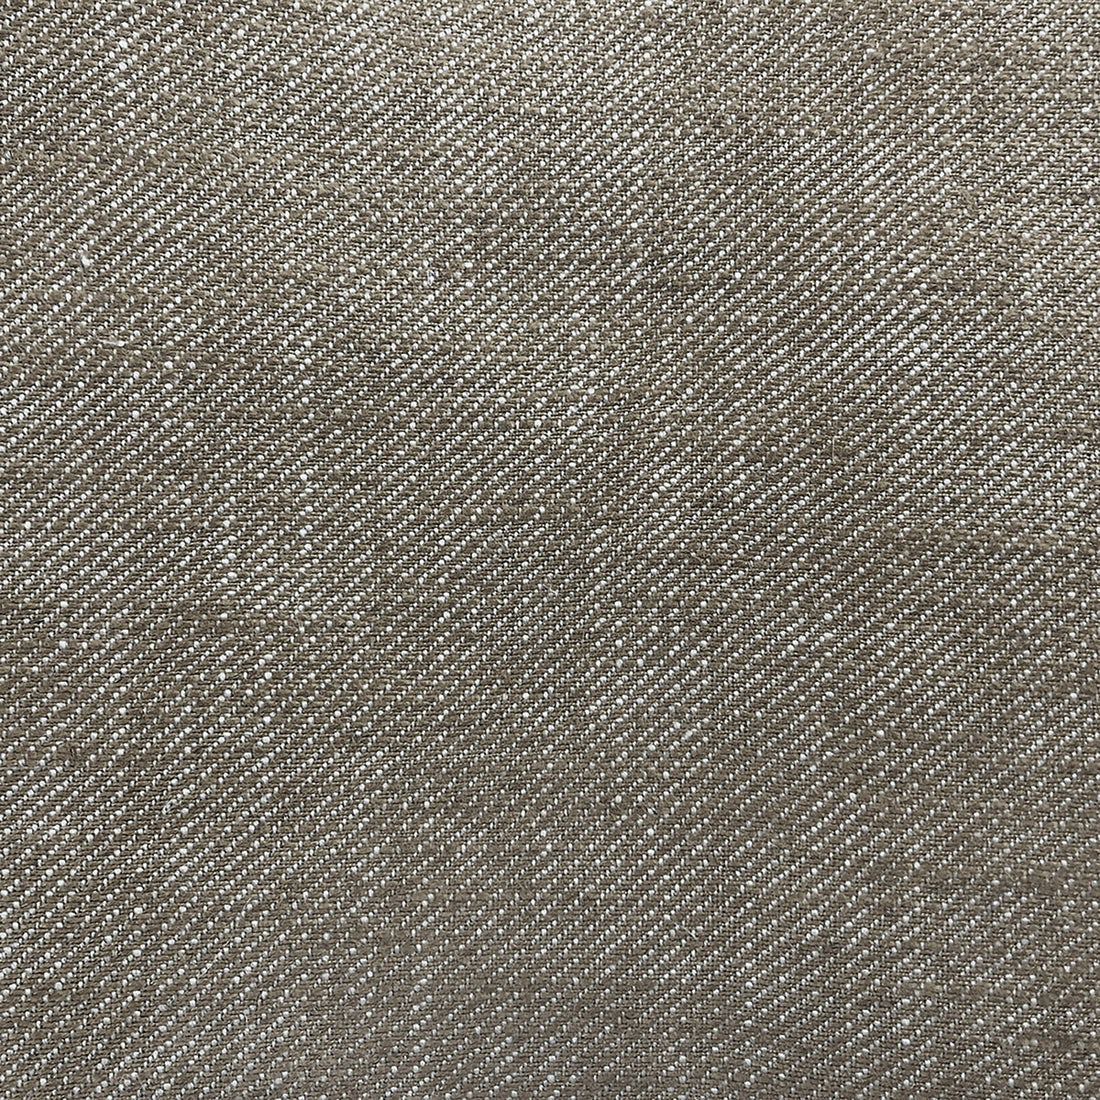 Hisa fabric in gris color - pattern GDT5639.007.0 - by Gaston y Daniela in the Gaston Japon collection